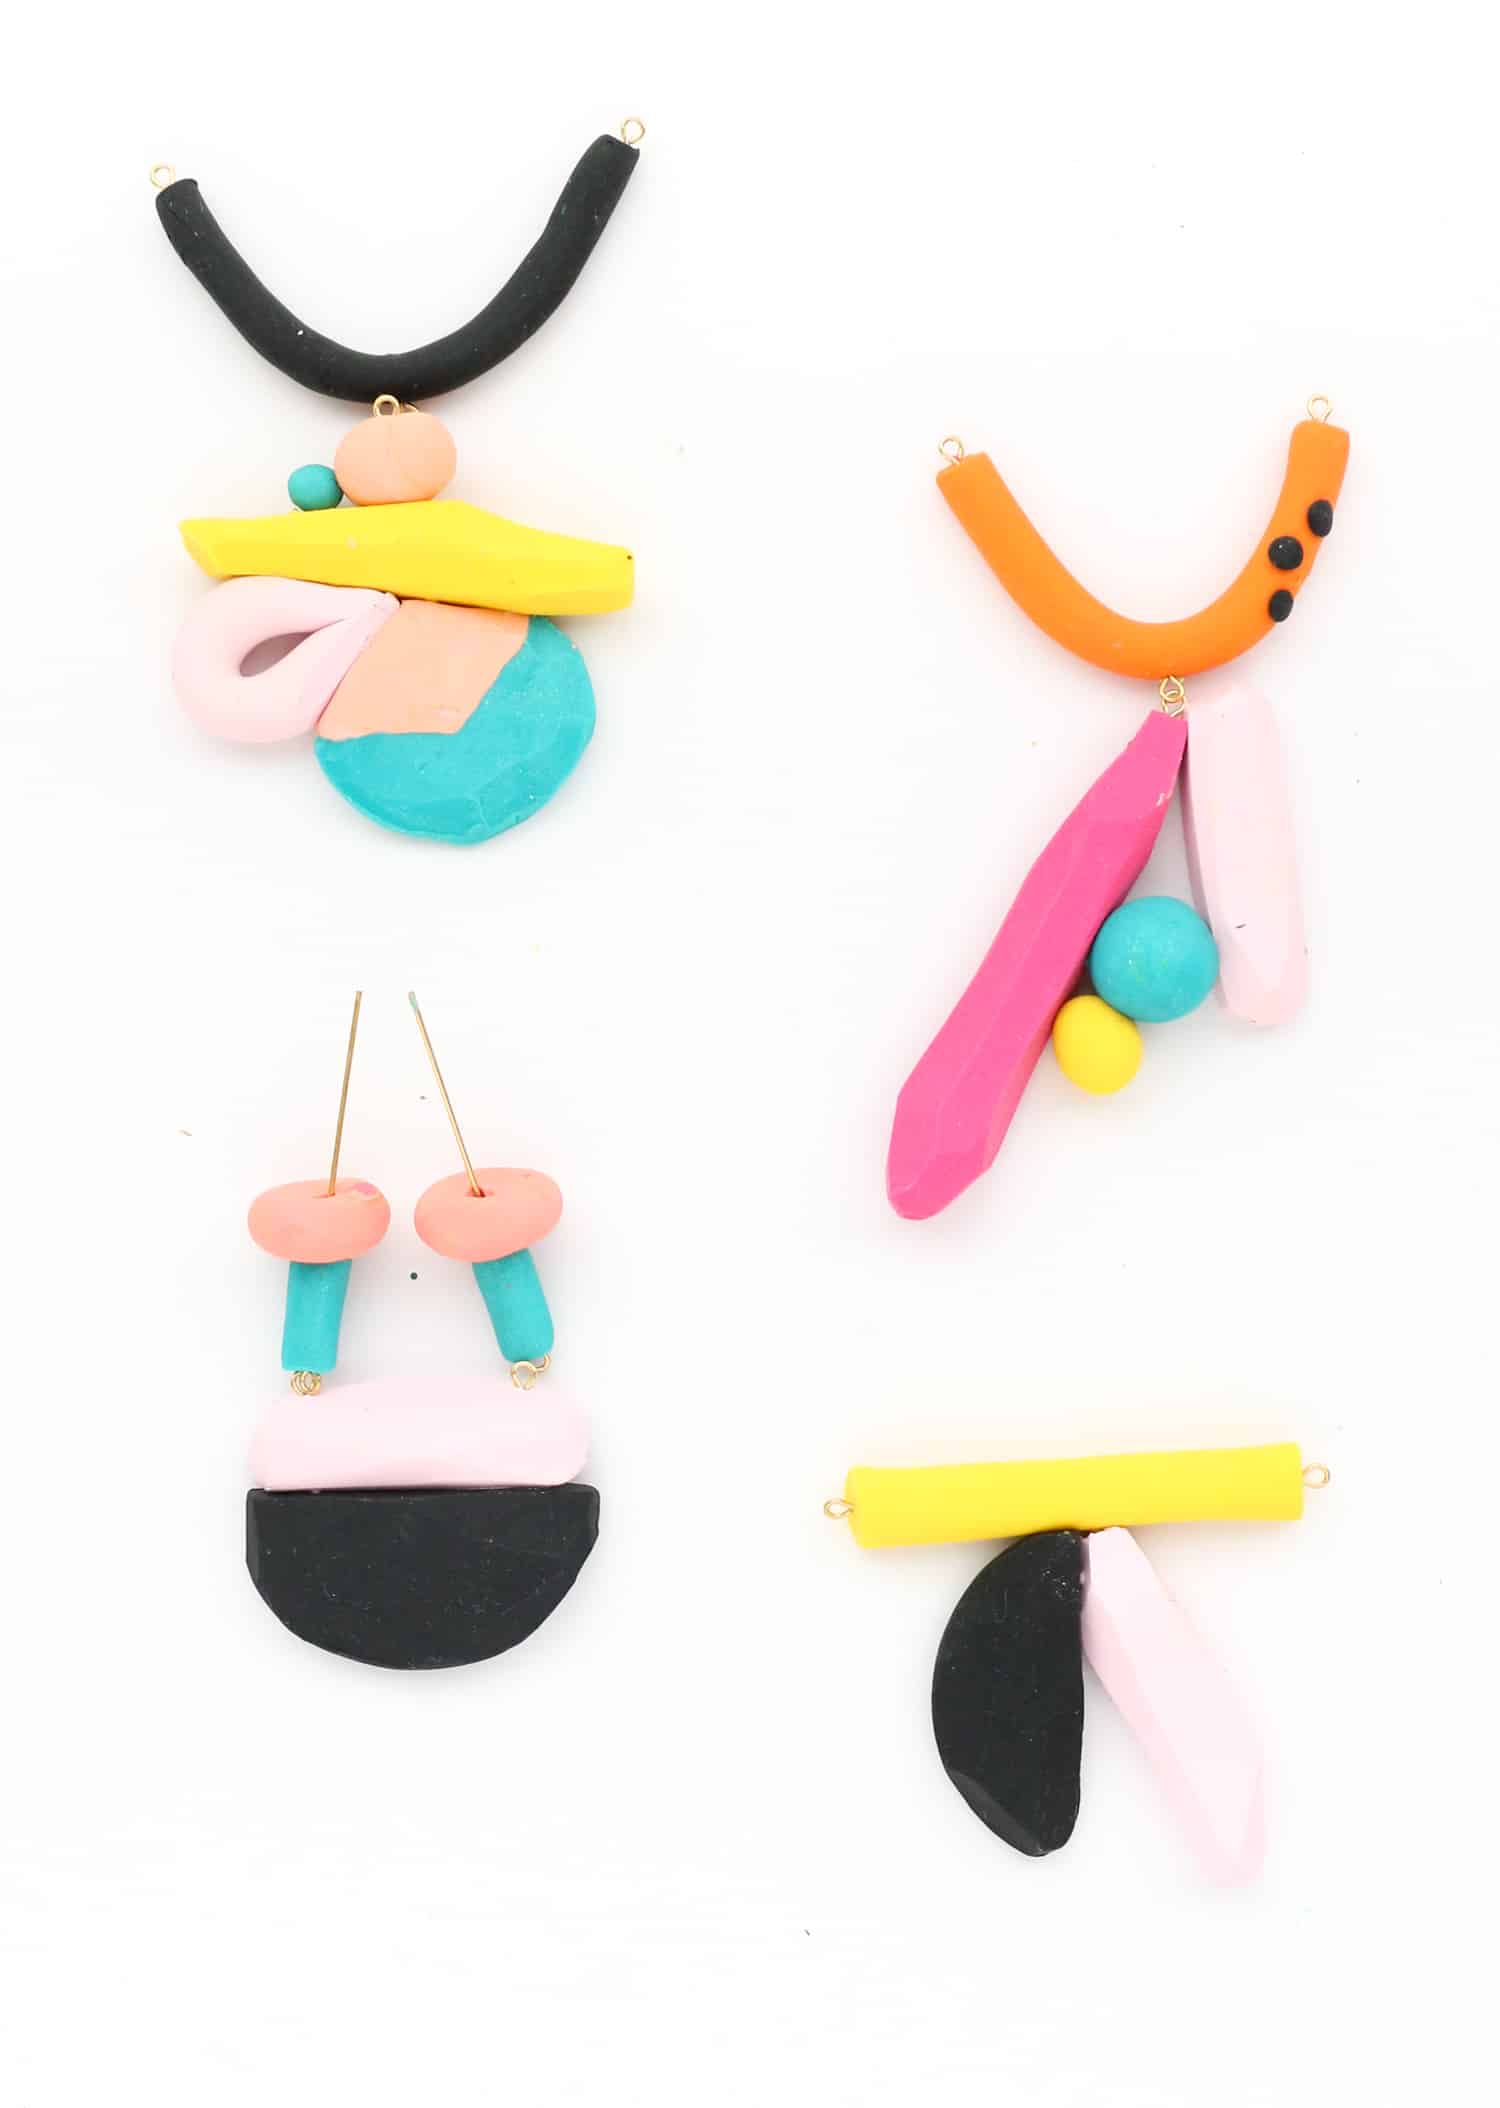 DIY-Colorful-Geometric-Necklaces-click-through-for-tutorial-_-4